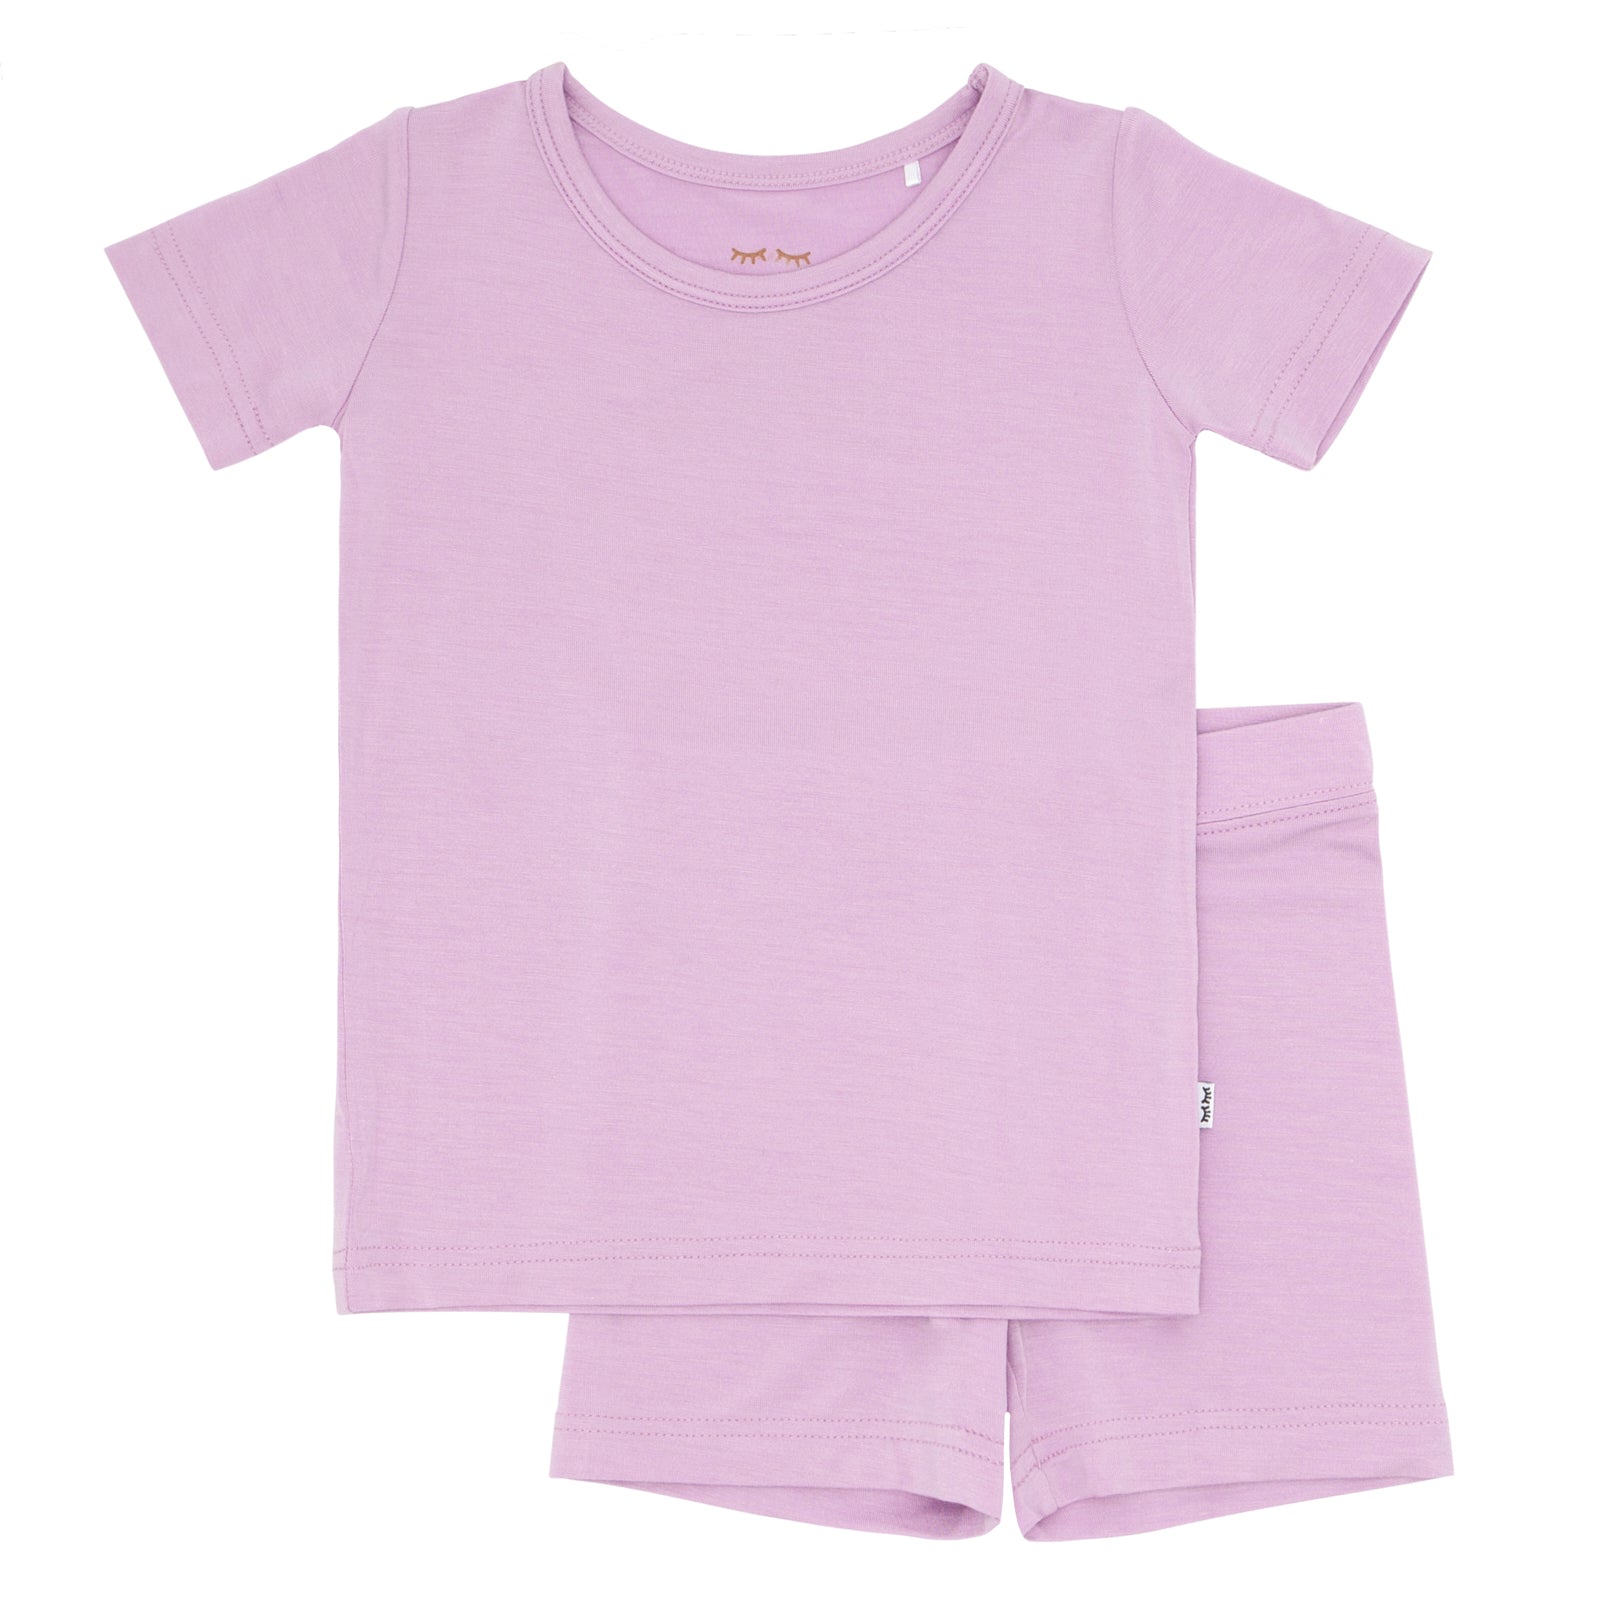 Flat lay image of a Light Orchid two piece shorts and short sleeve pajama set